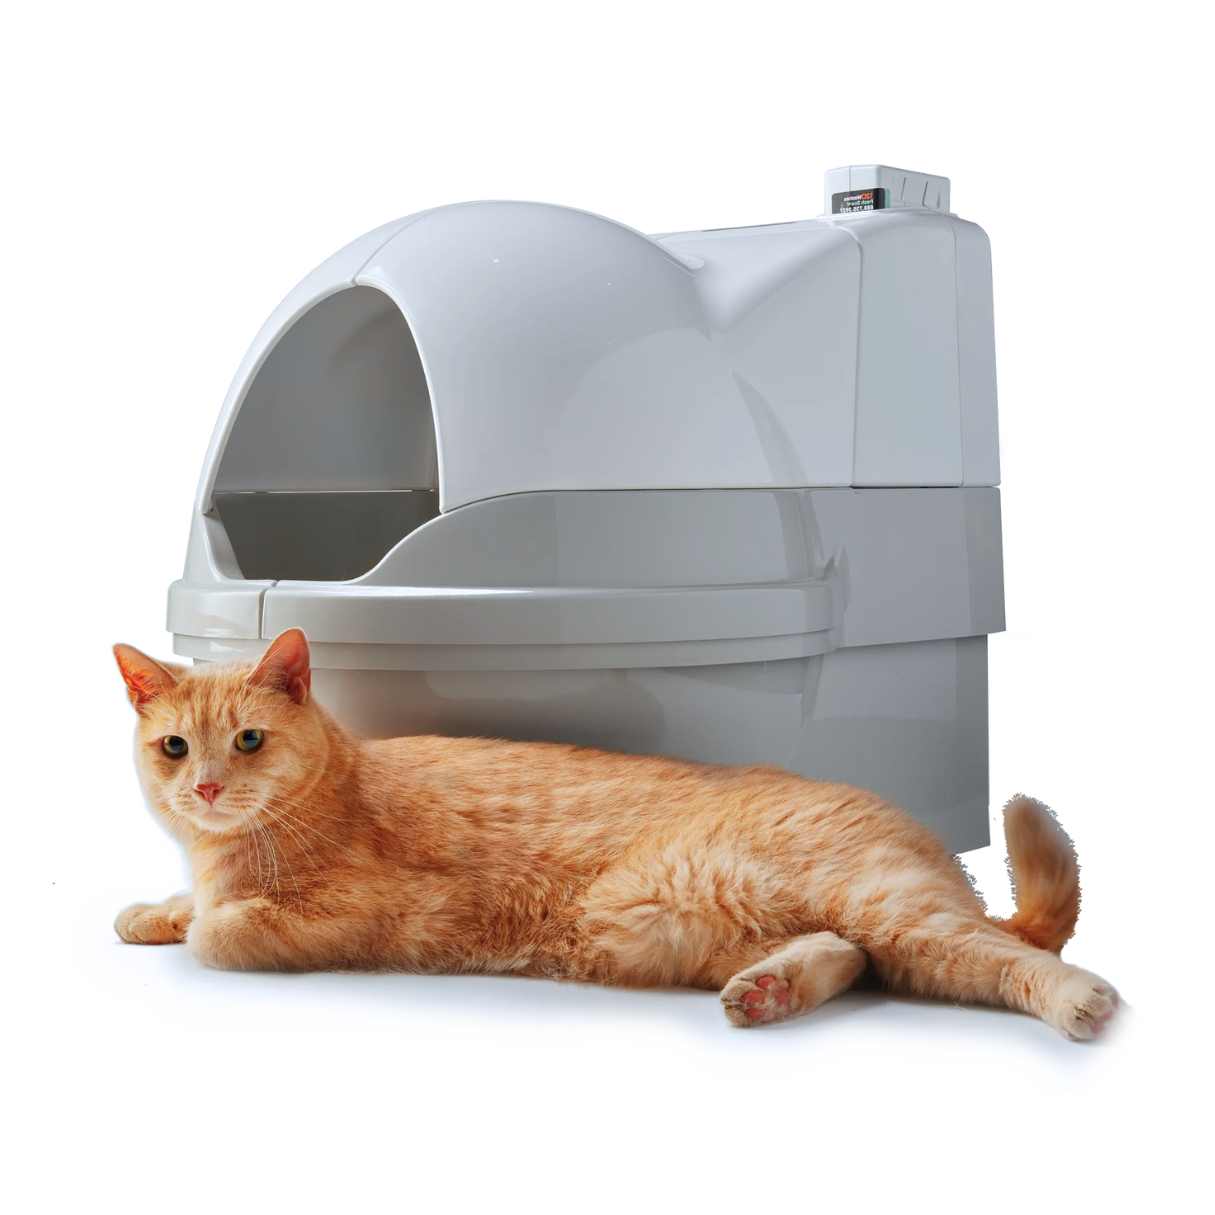 What Is The Largest Cat Litter Box Available